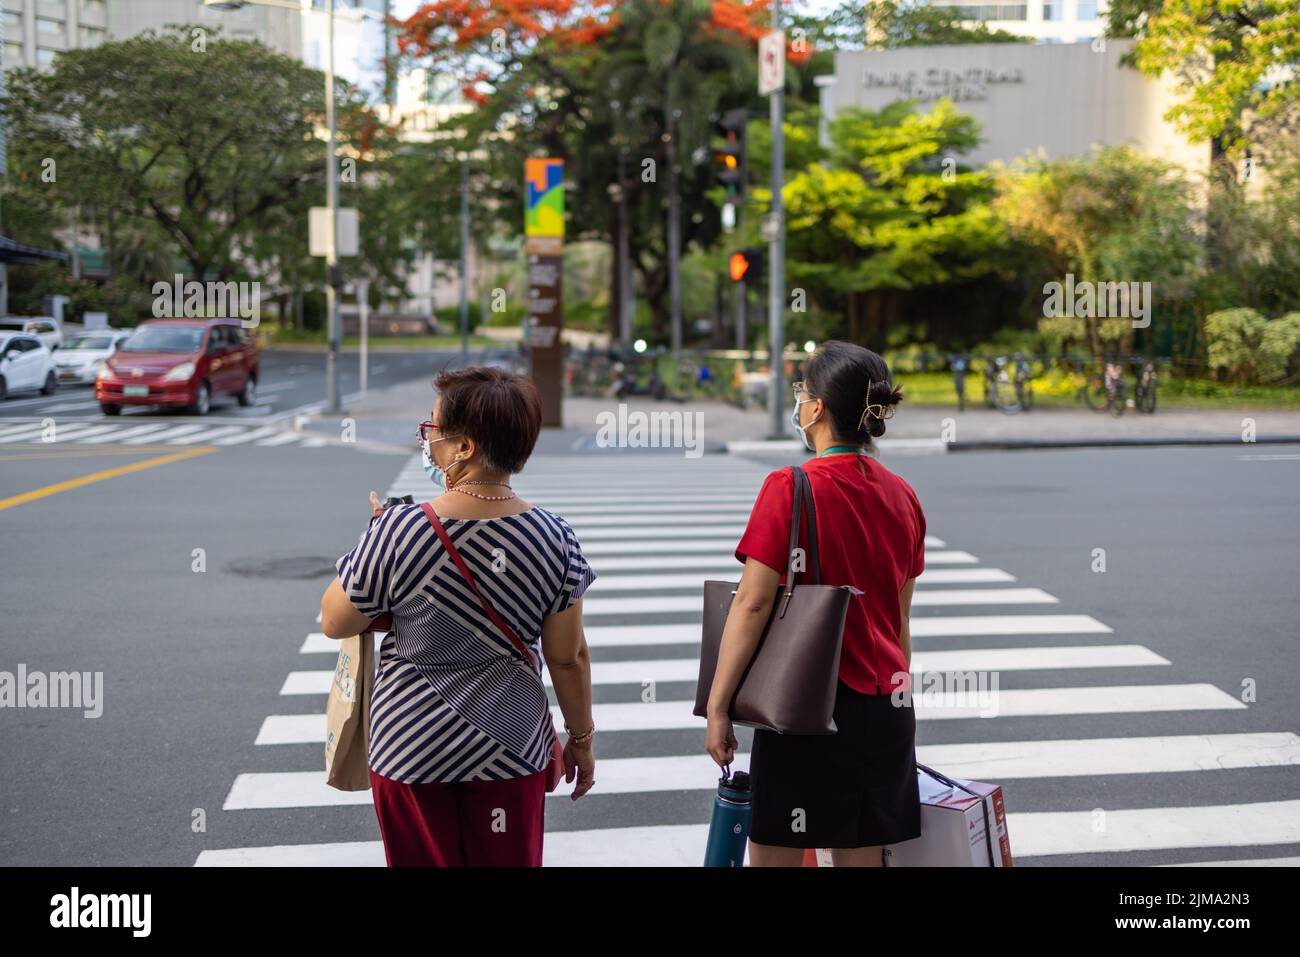 Two pedestrians waiting to cross the road outside the Glorietta Mall Stock Photo